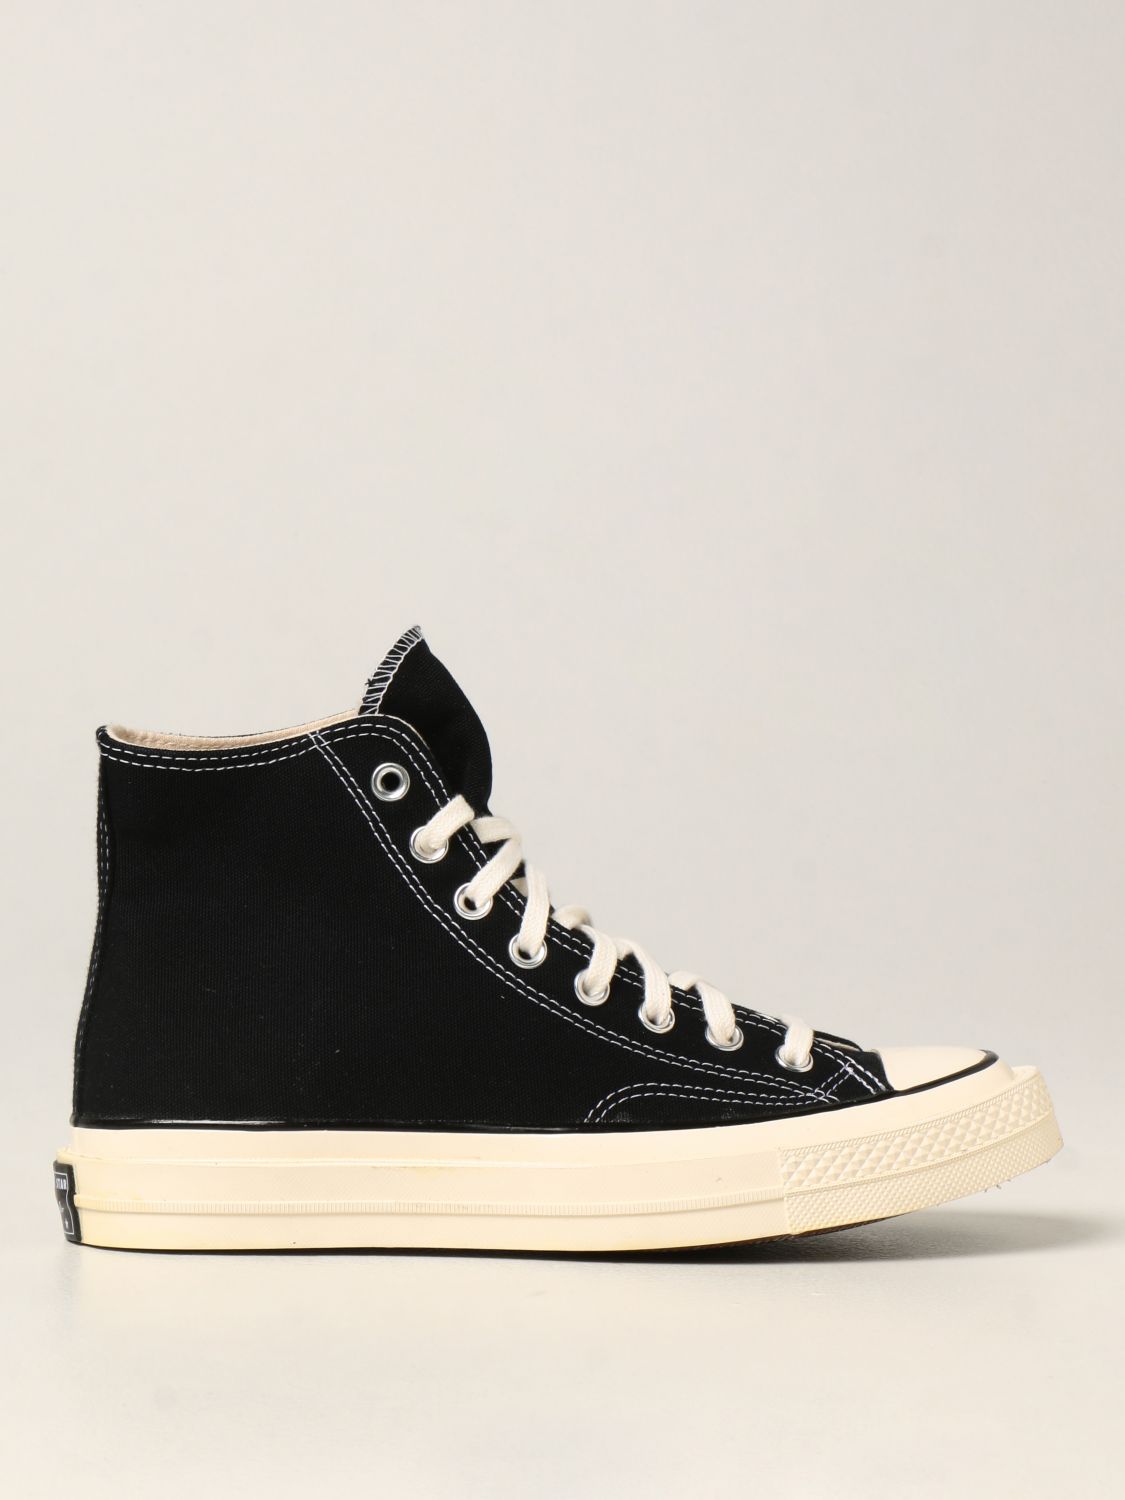 Stue Vejrudsigt Fabrikant CONVERSE LIMITED EDITION: Chuck 70 sneakers in canvasZ - Black | Converse  Limited Edition sneakers 169145C online at GIGLIO.COM